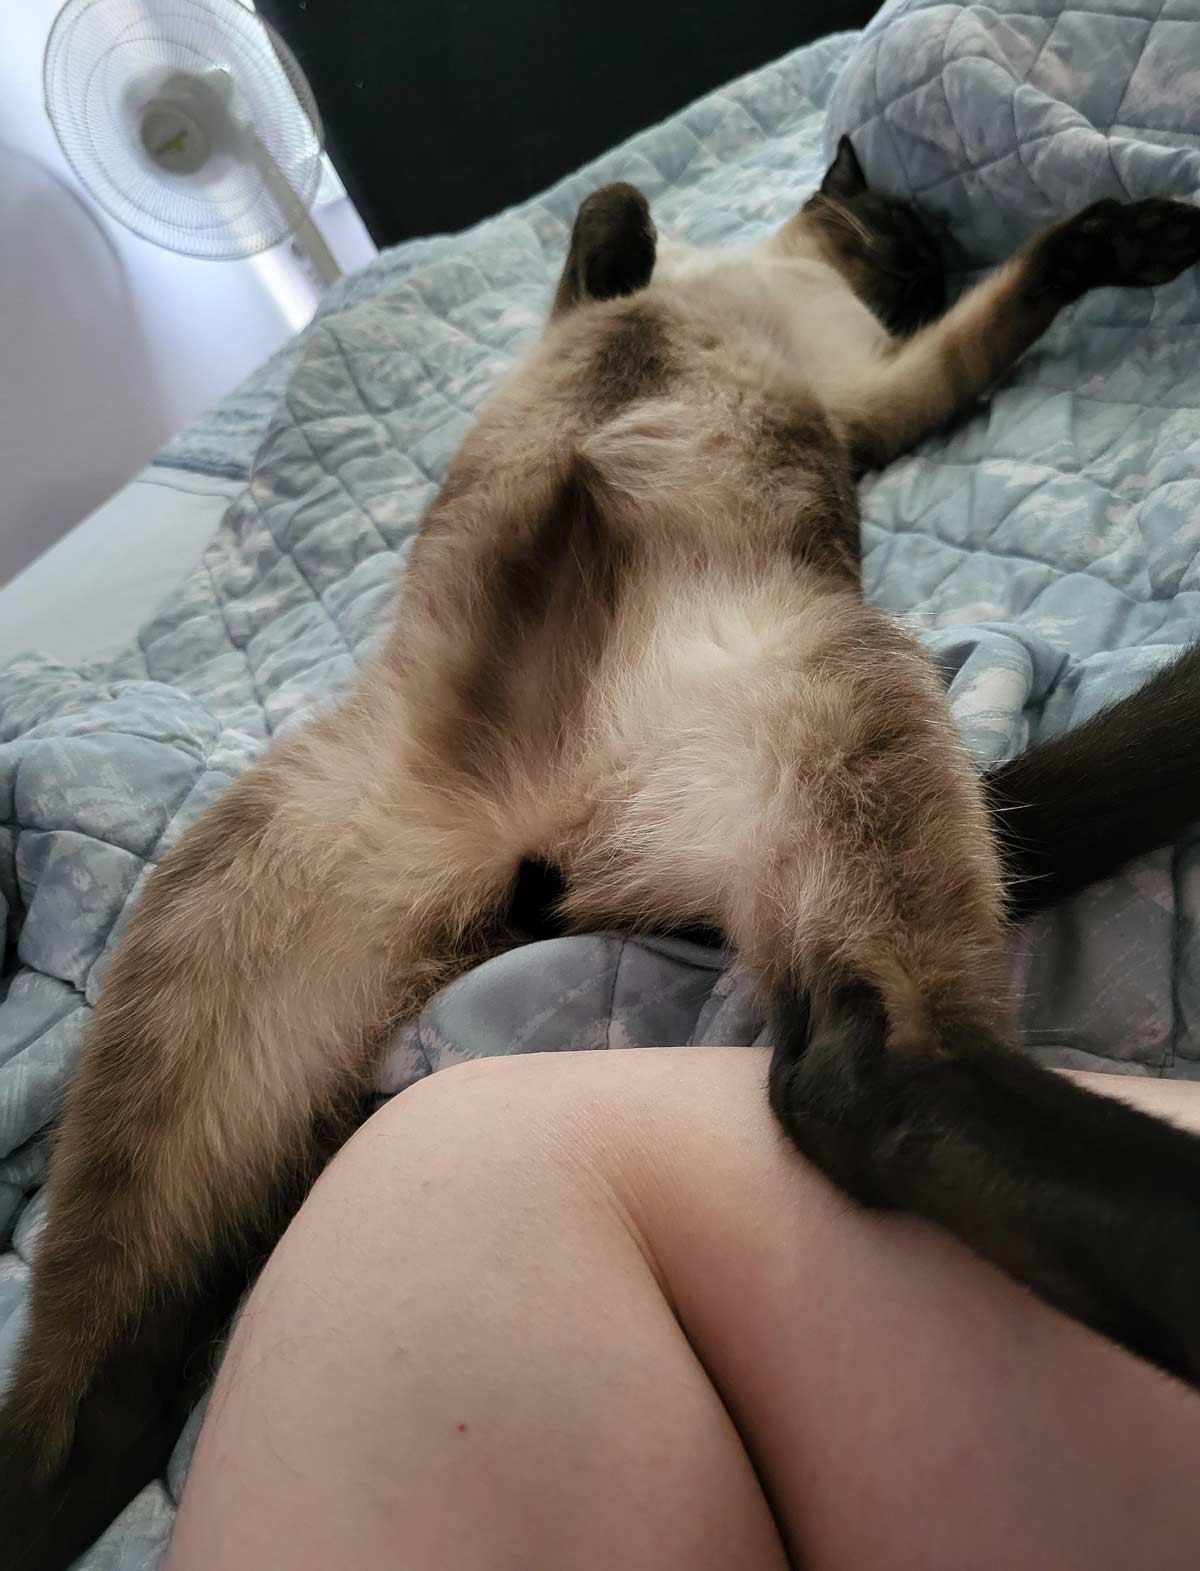 My cat refuses to sleep in any other position than his back